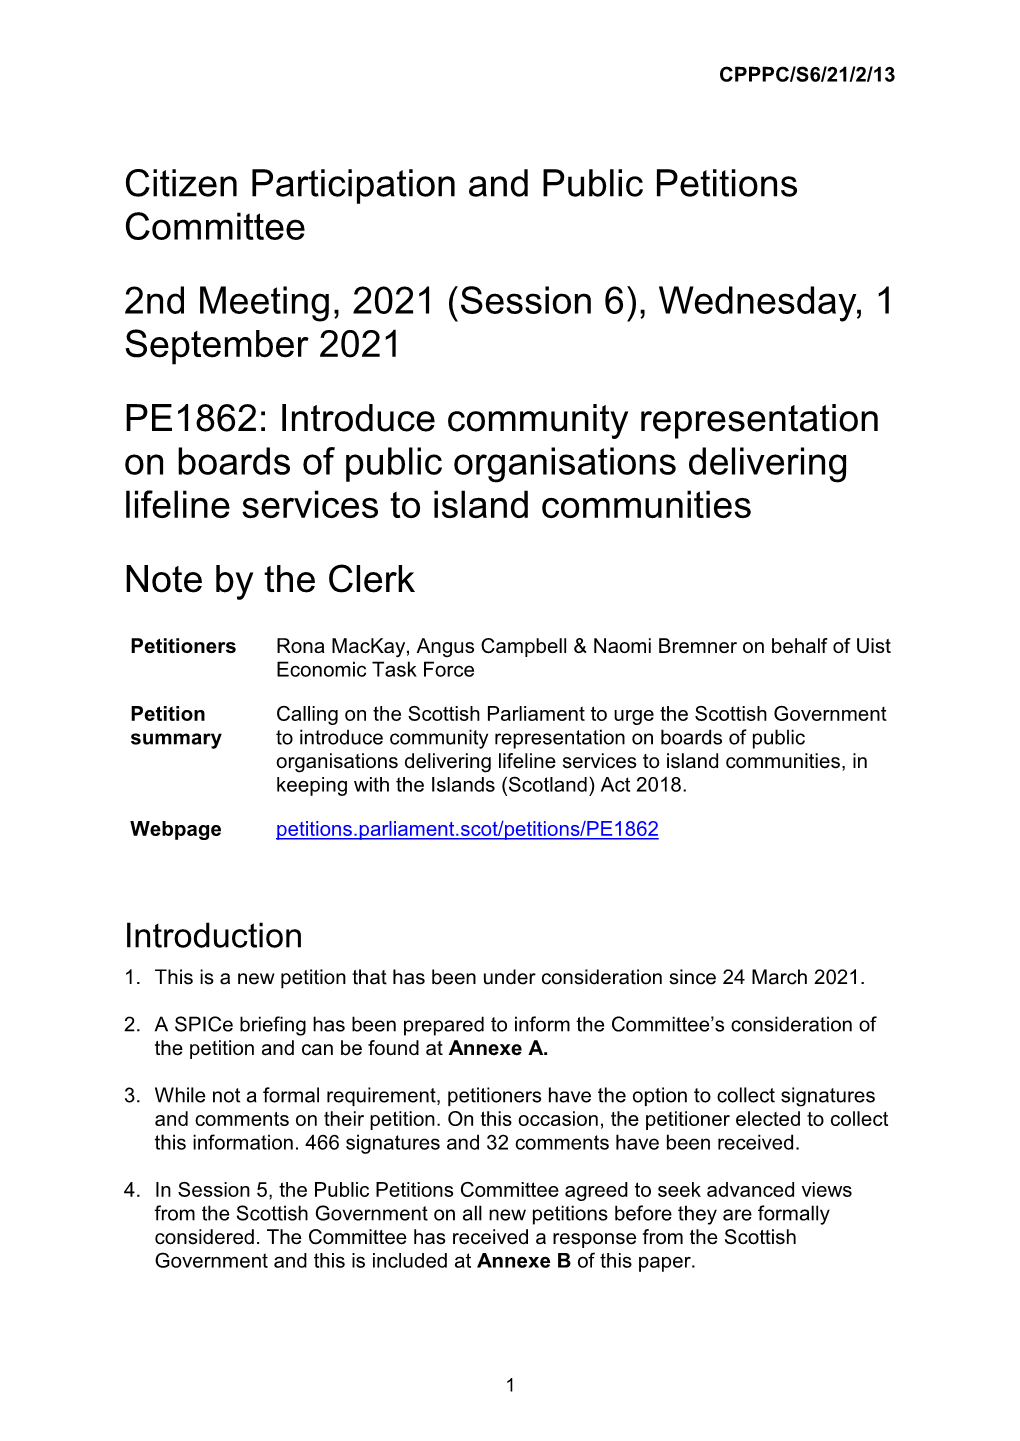 Citizen Participation and Public Petitions Committee 2Nd Meeting